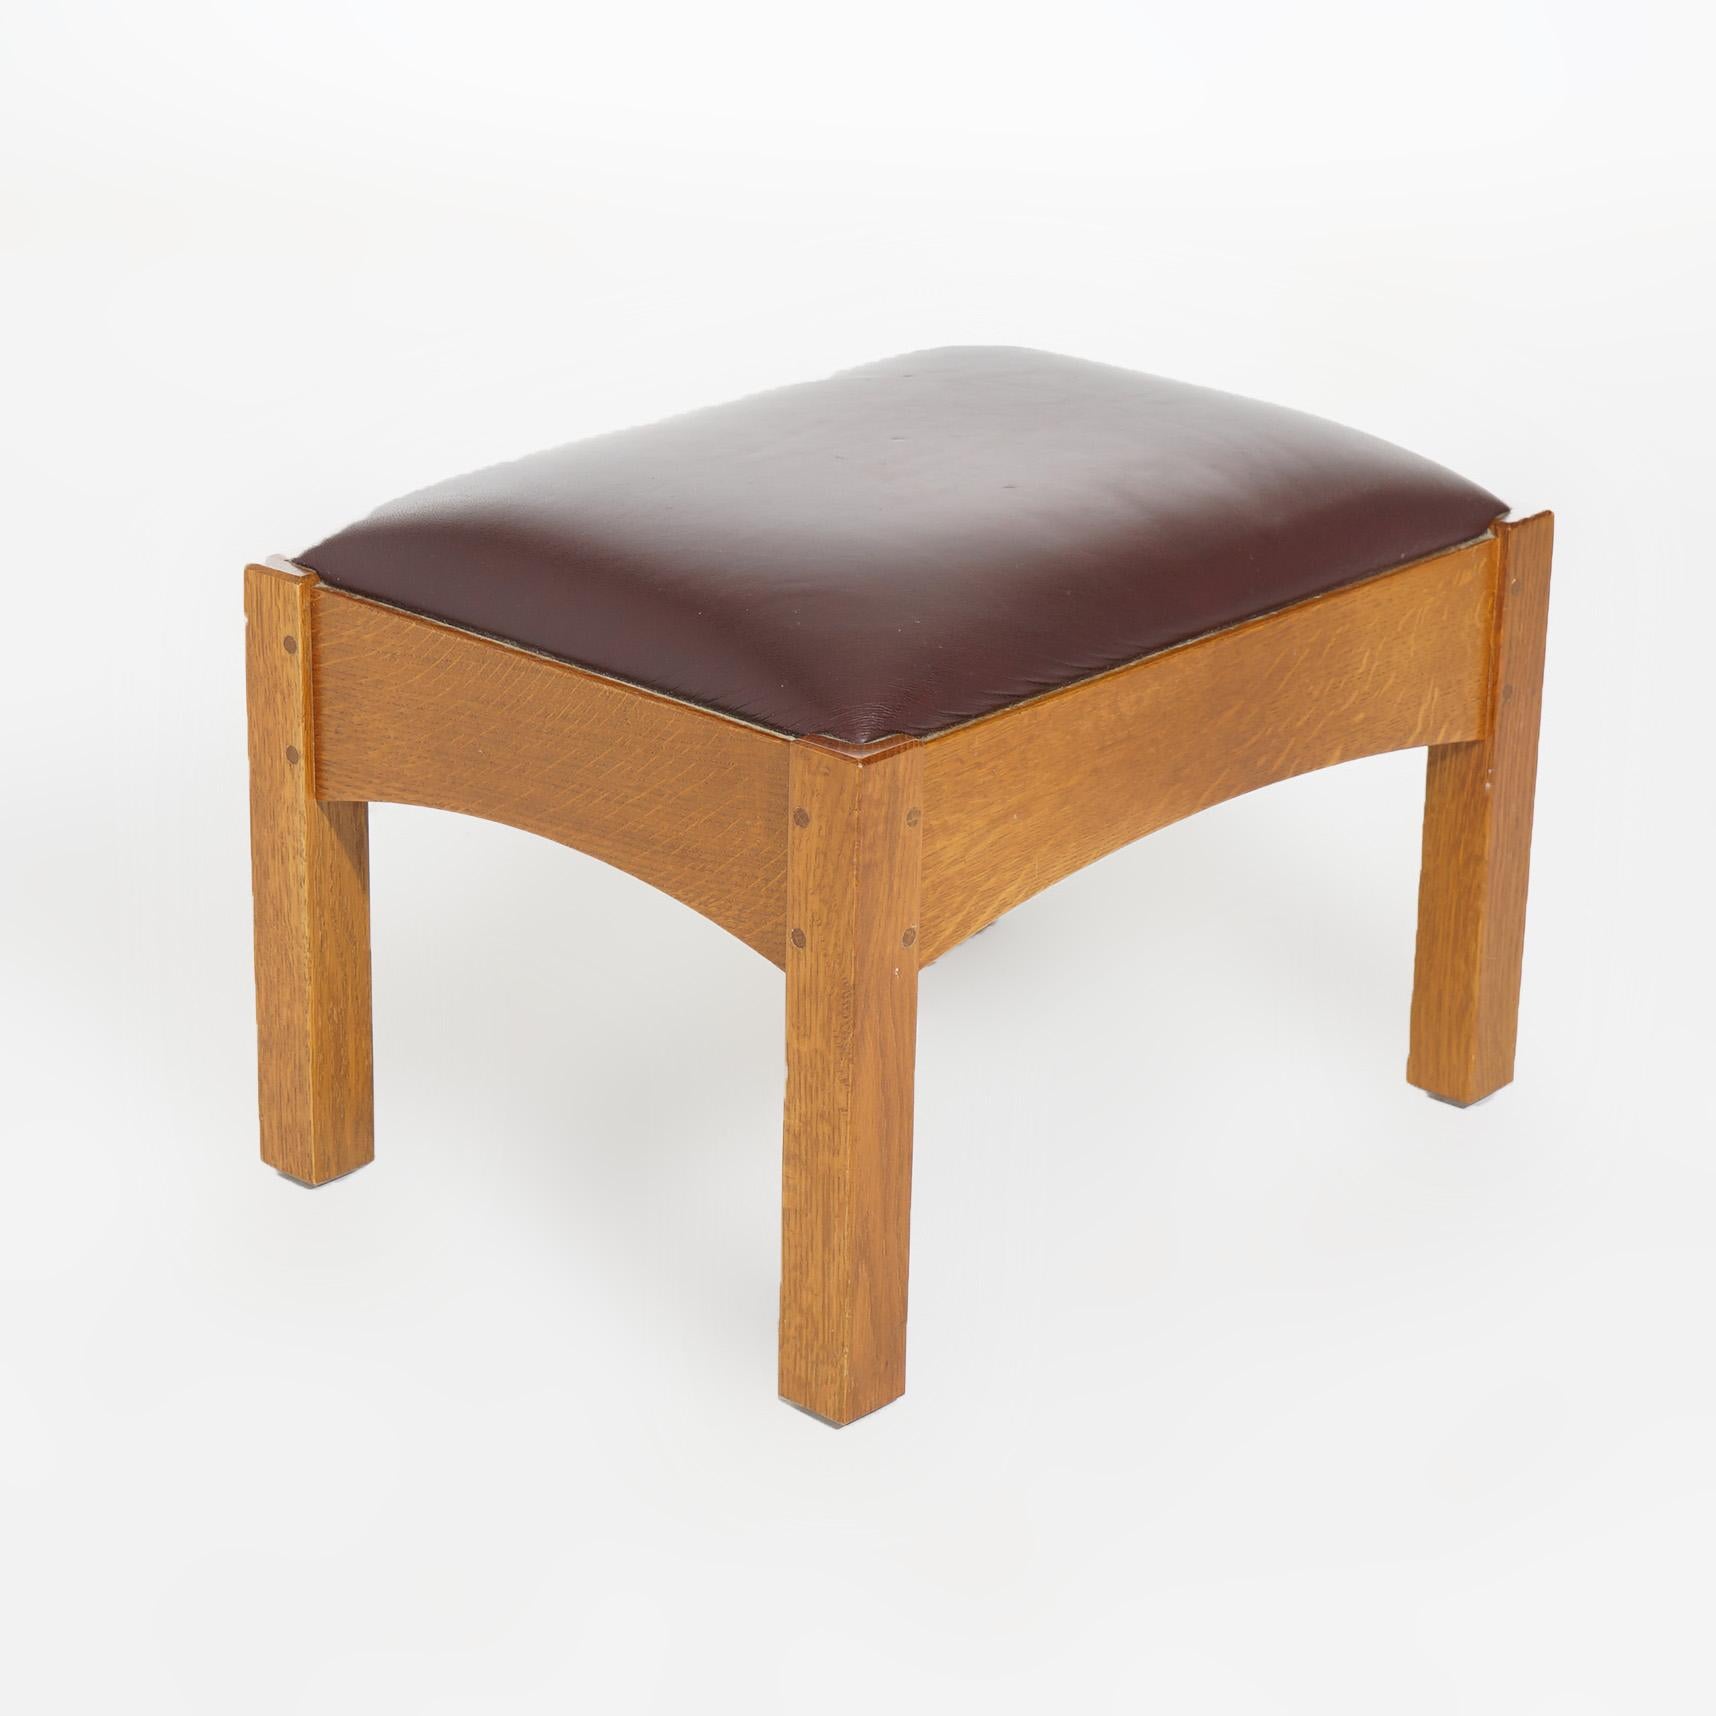 ***Ask About Discounted In-House Shipping***
An Arts & Crafts style Mission footstool by L&JG Stickley offers upholstered seat on oak frame having arched skirt, square legs and maker label as photographed, 20th century

Measures - 15